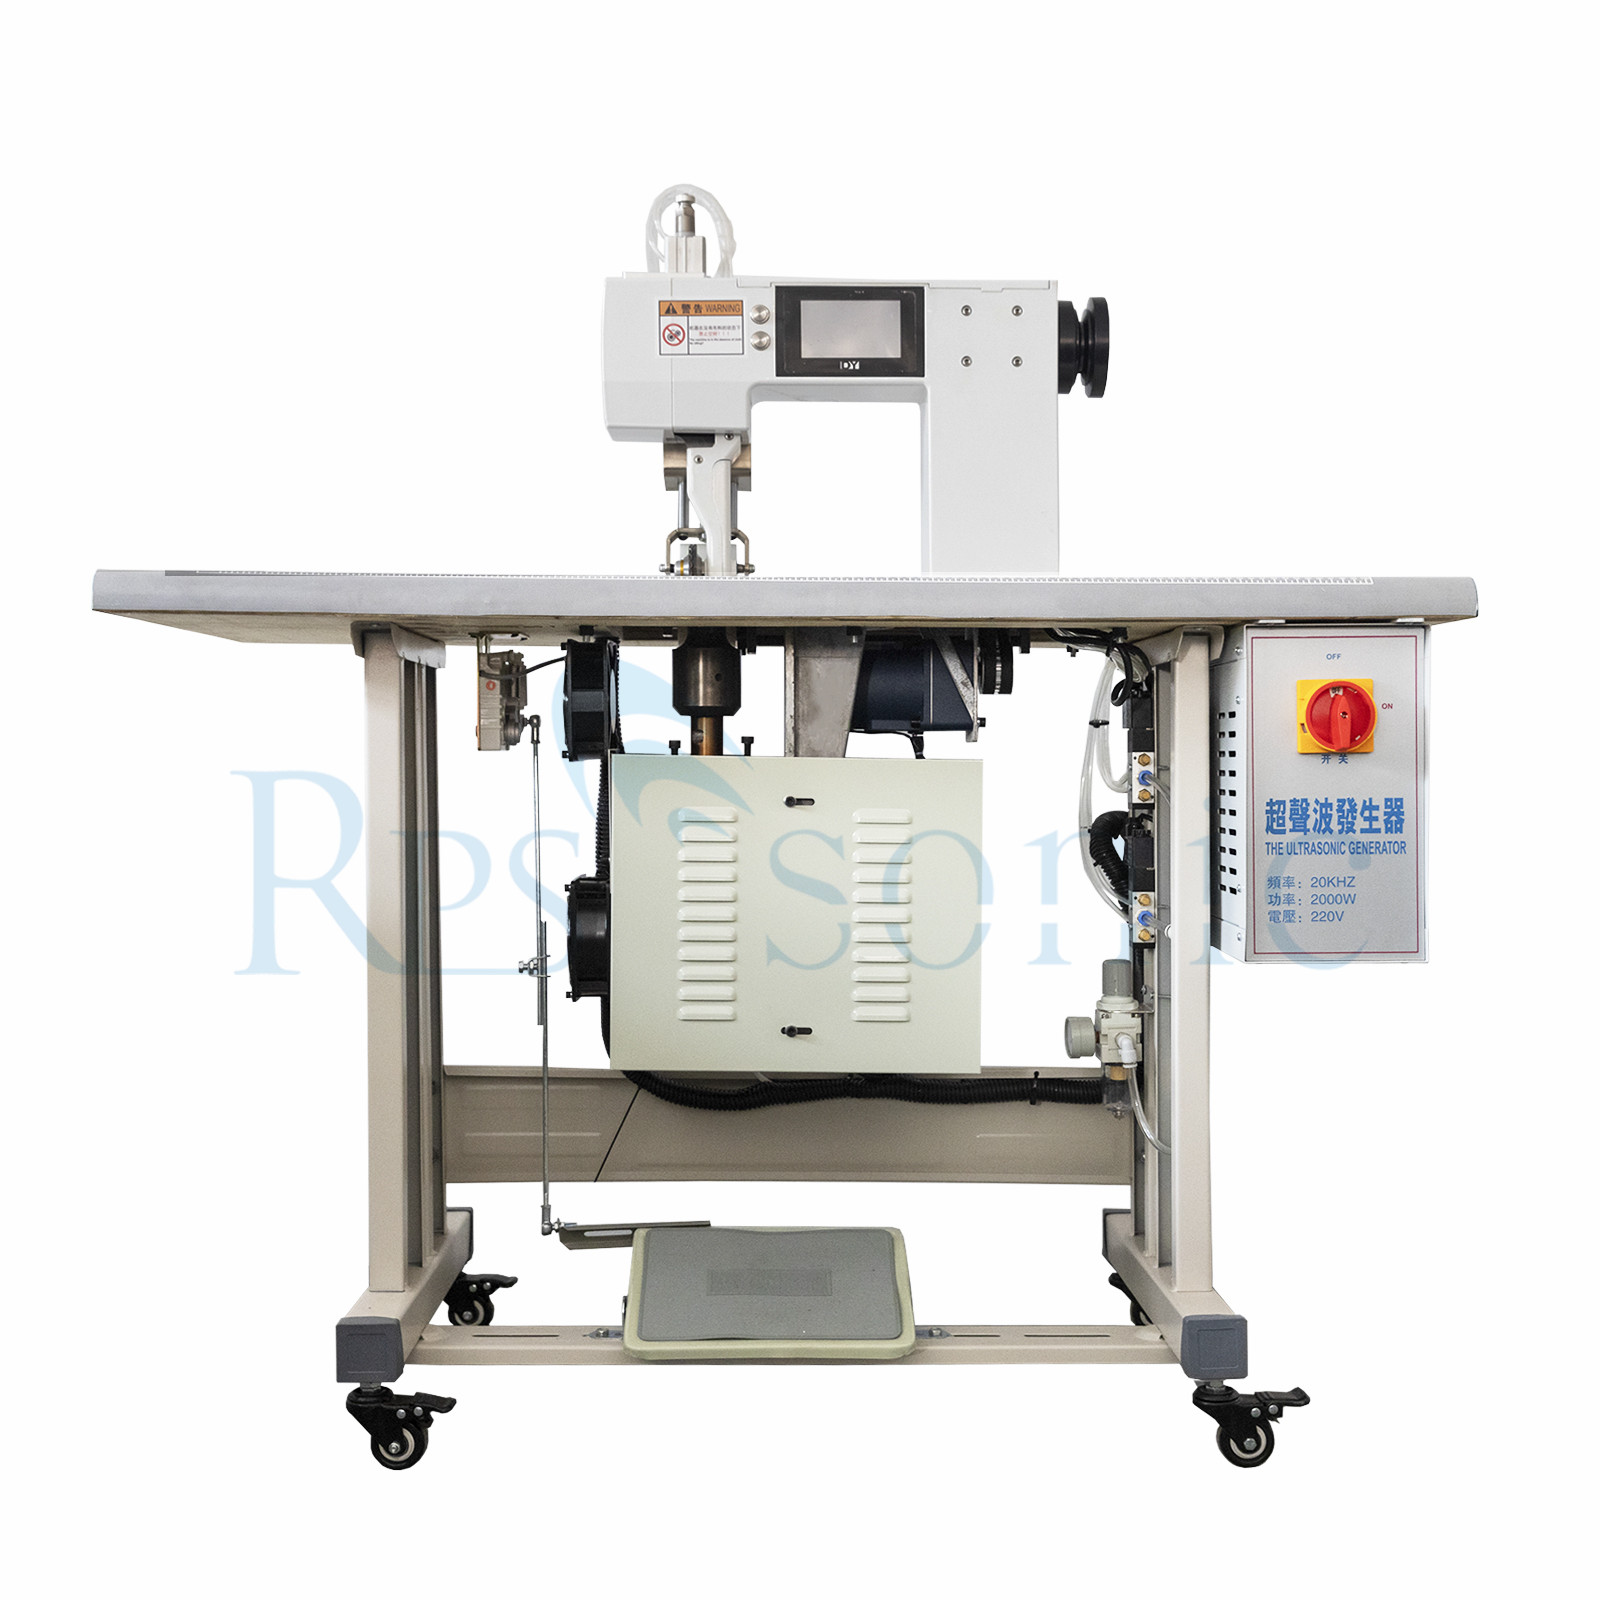 New Non-Woven Fibet Ultrasonic Lace Sewing Machine of Production Tablecloth